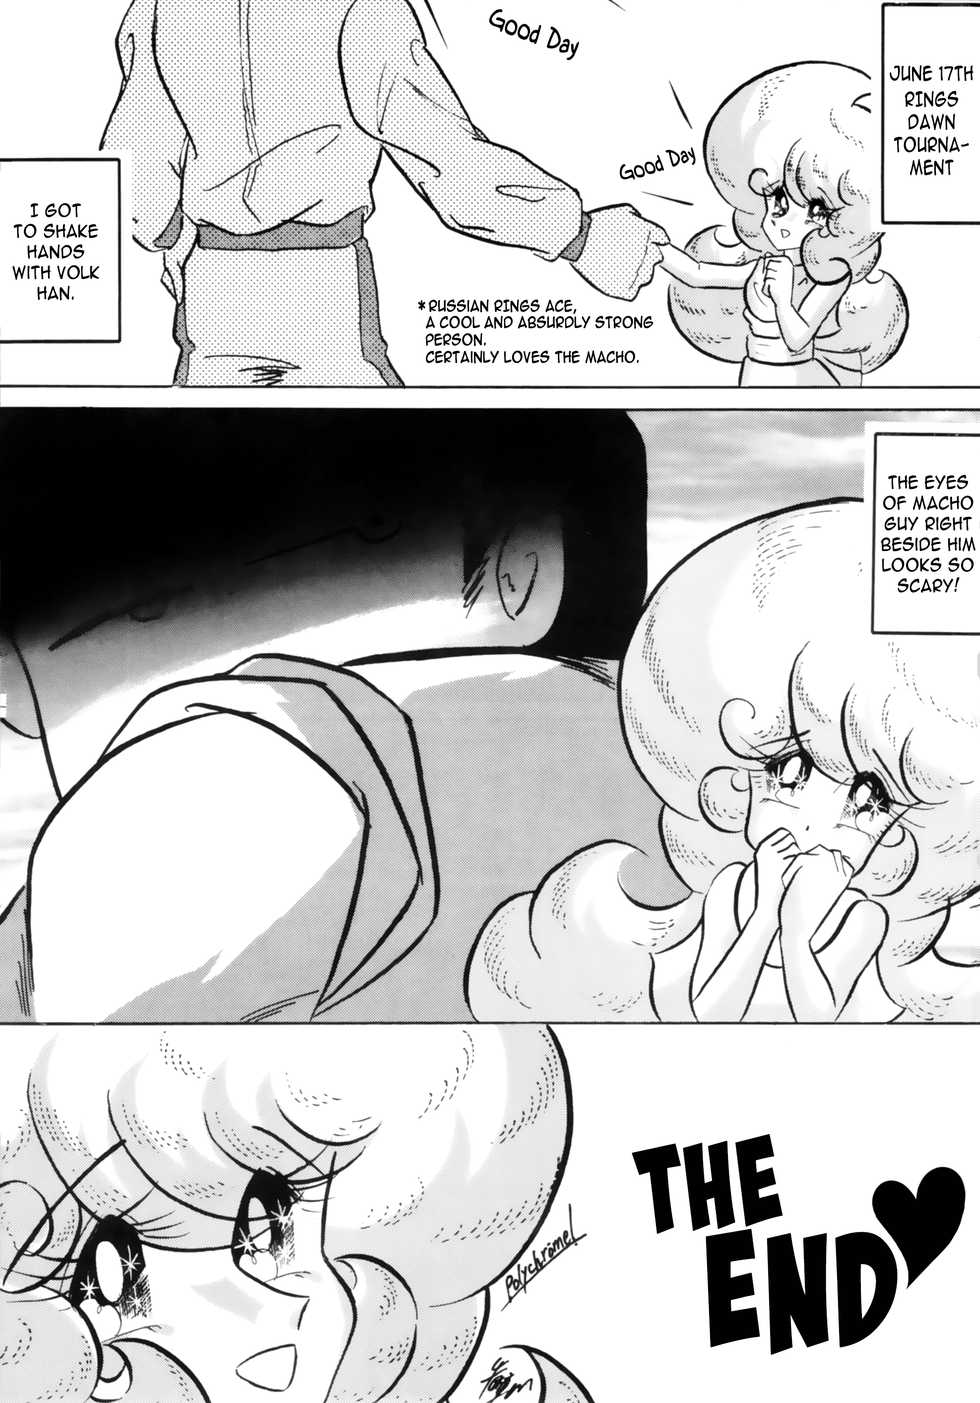 [C-Company] C-COMPANY SPECIAL STAGE 16 (Ranma 1/2, Tonde Buurin) [English] [EHCOVE] - Page 37